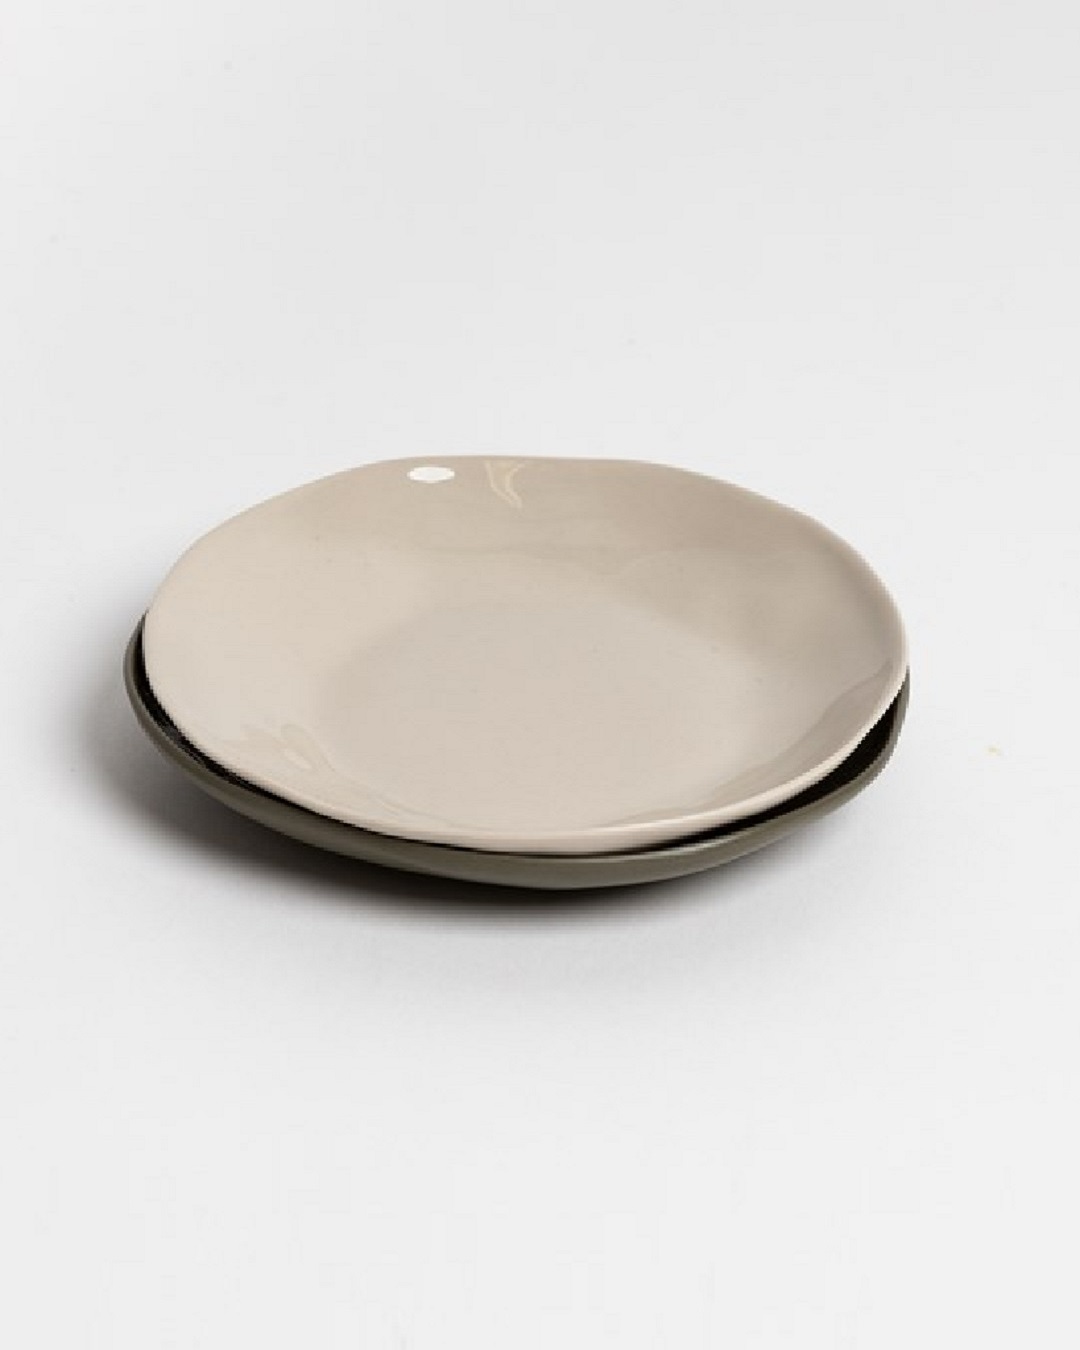 Cashmere plate on top of olive plate